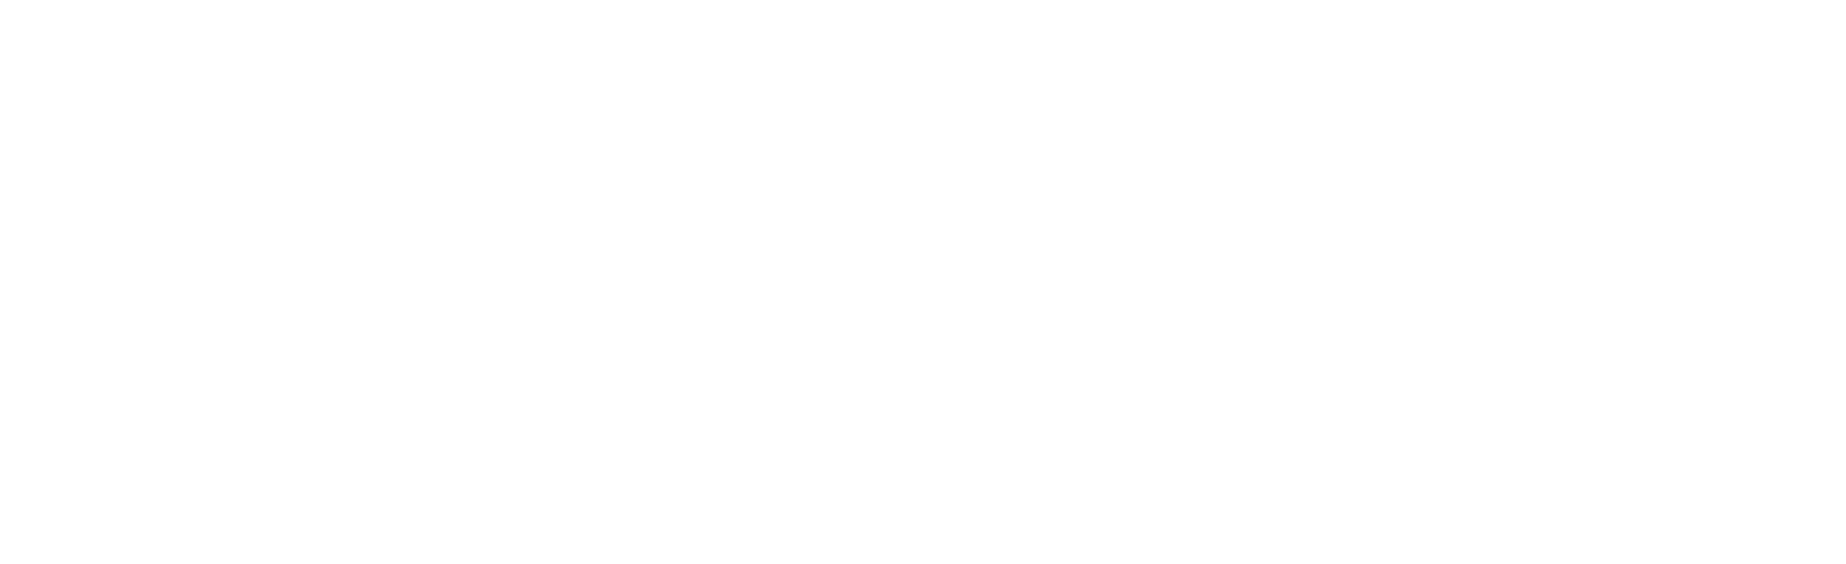 Gastrocentro-1.png